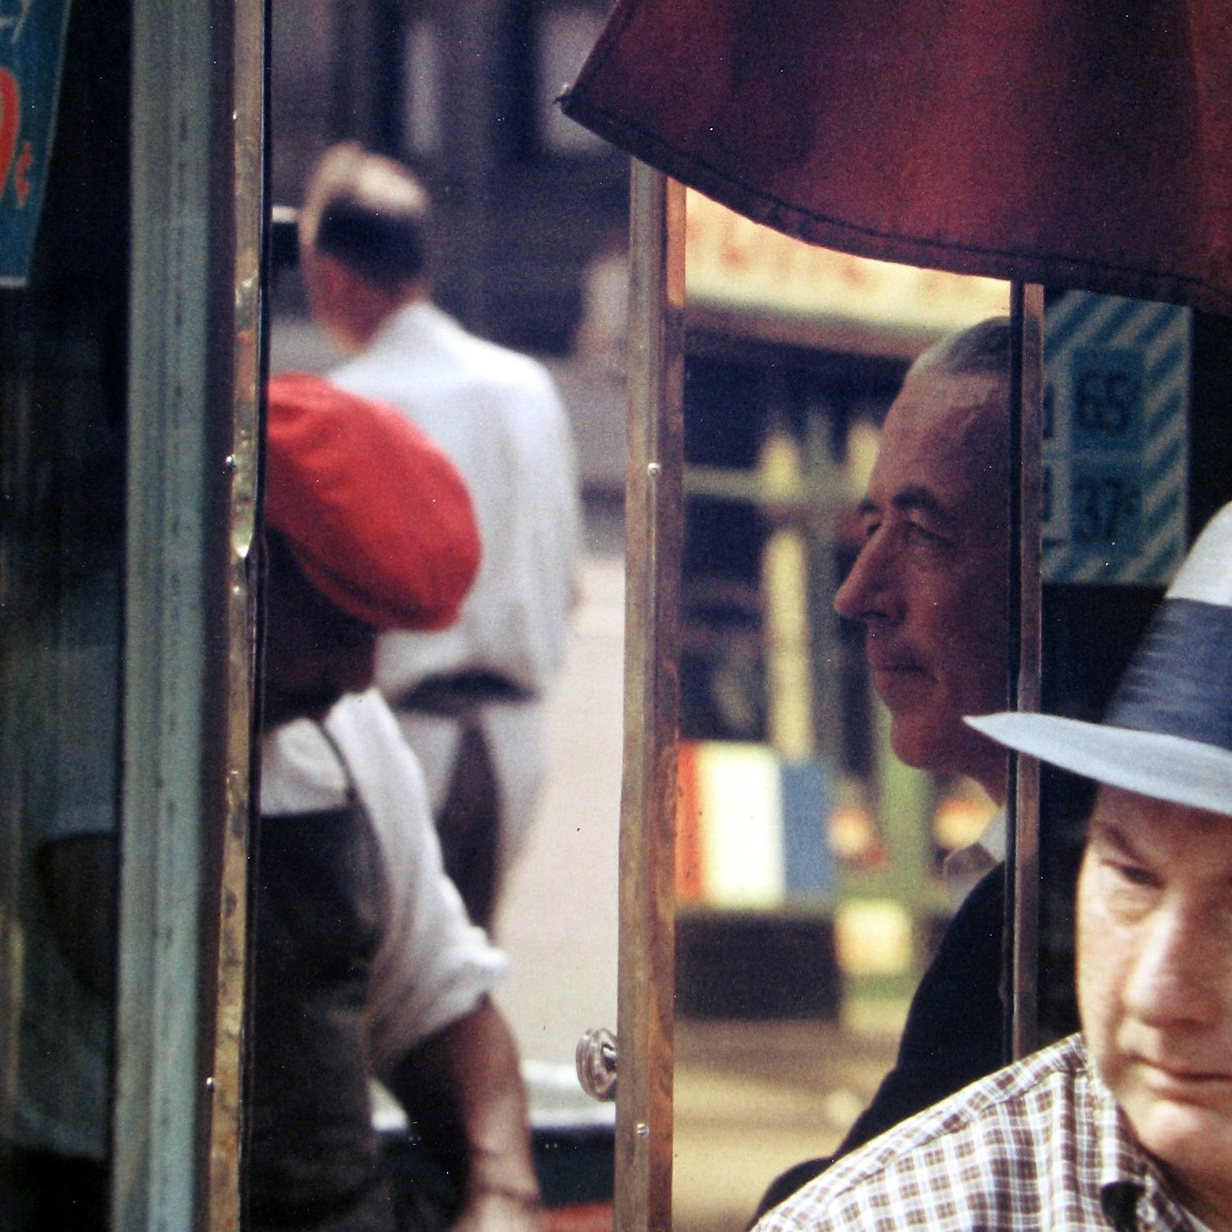 Saul Leiter, Viewing Room